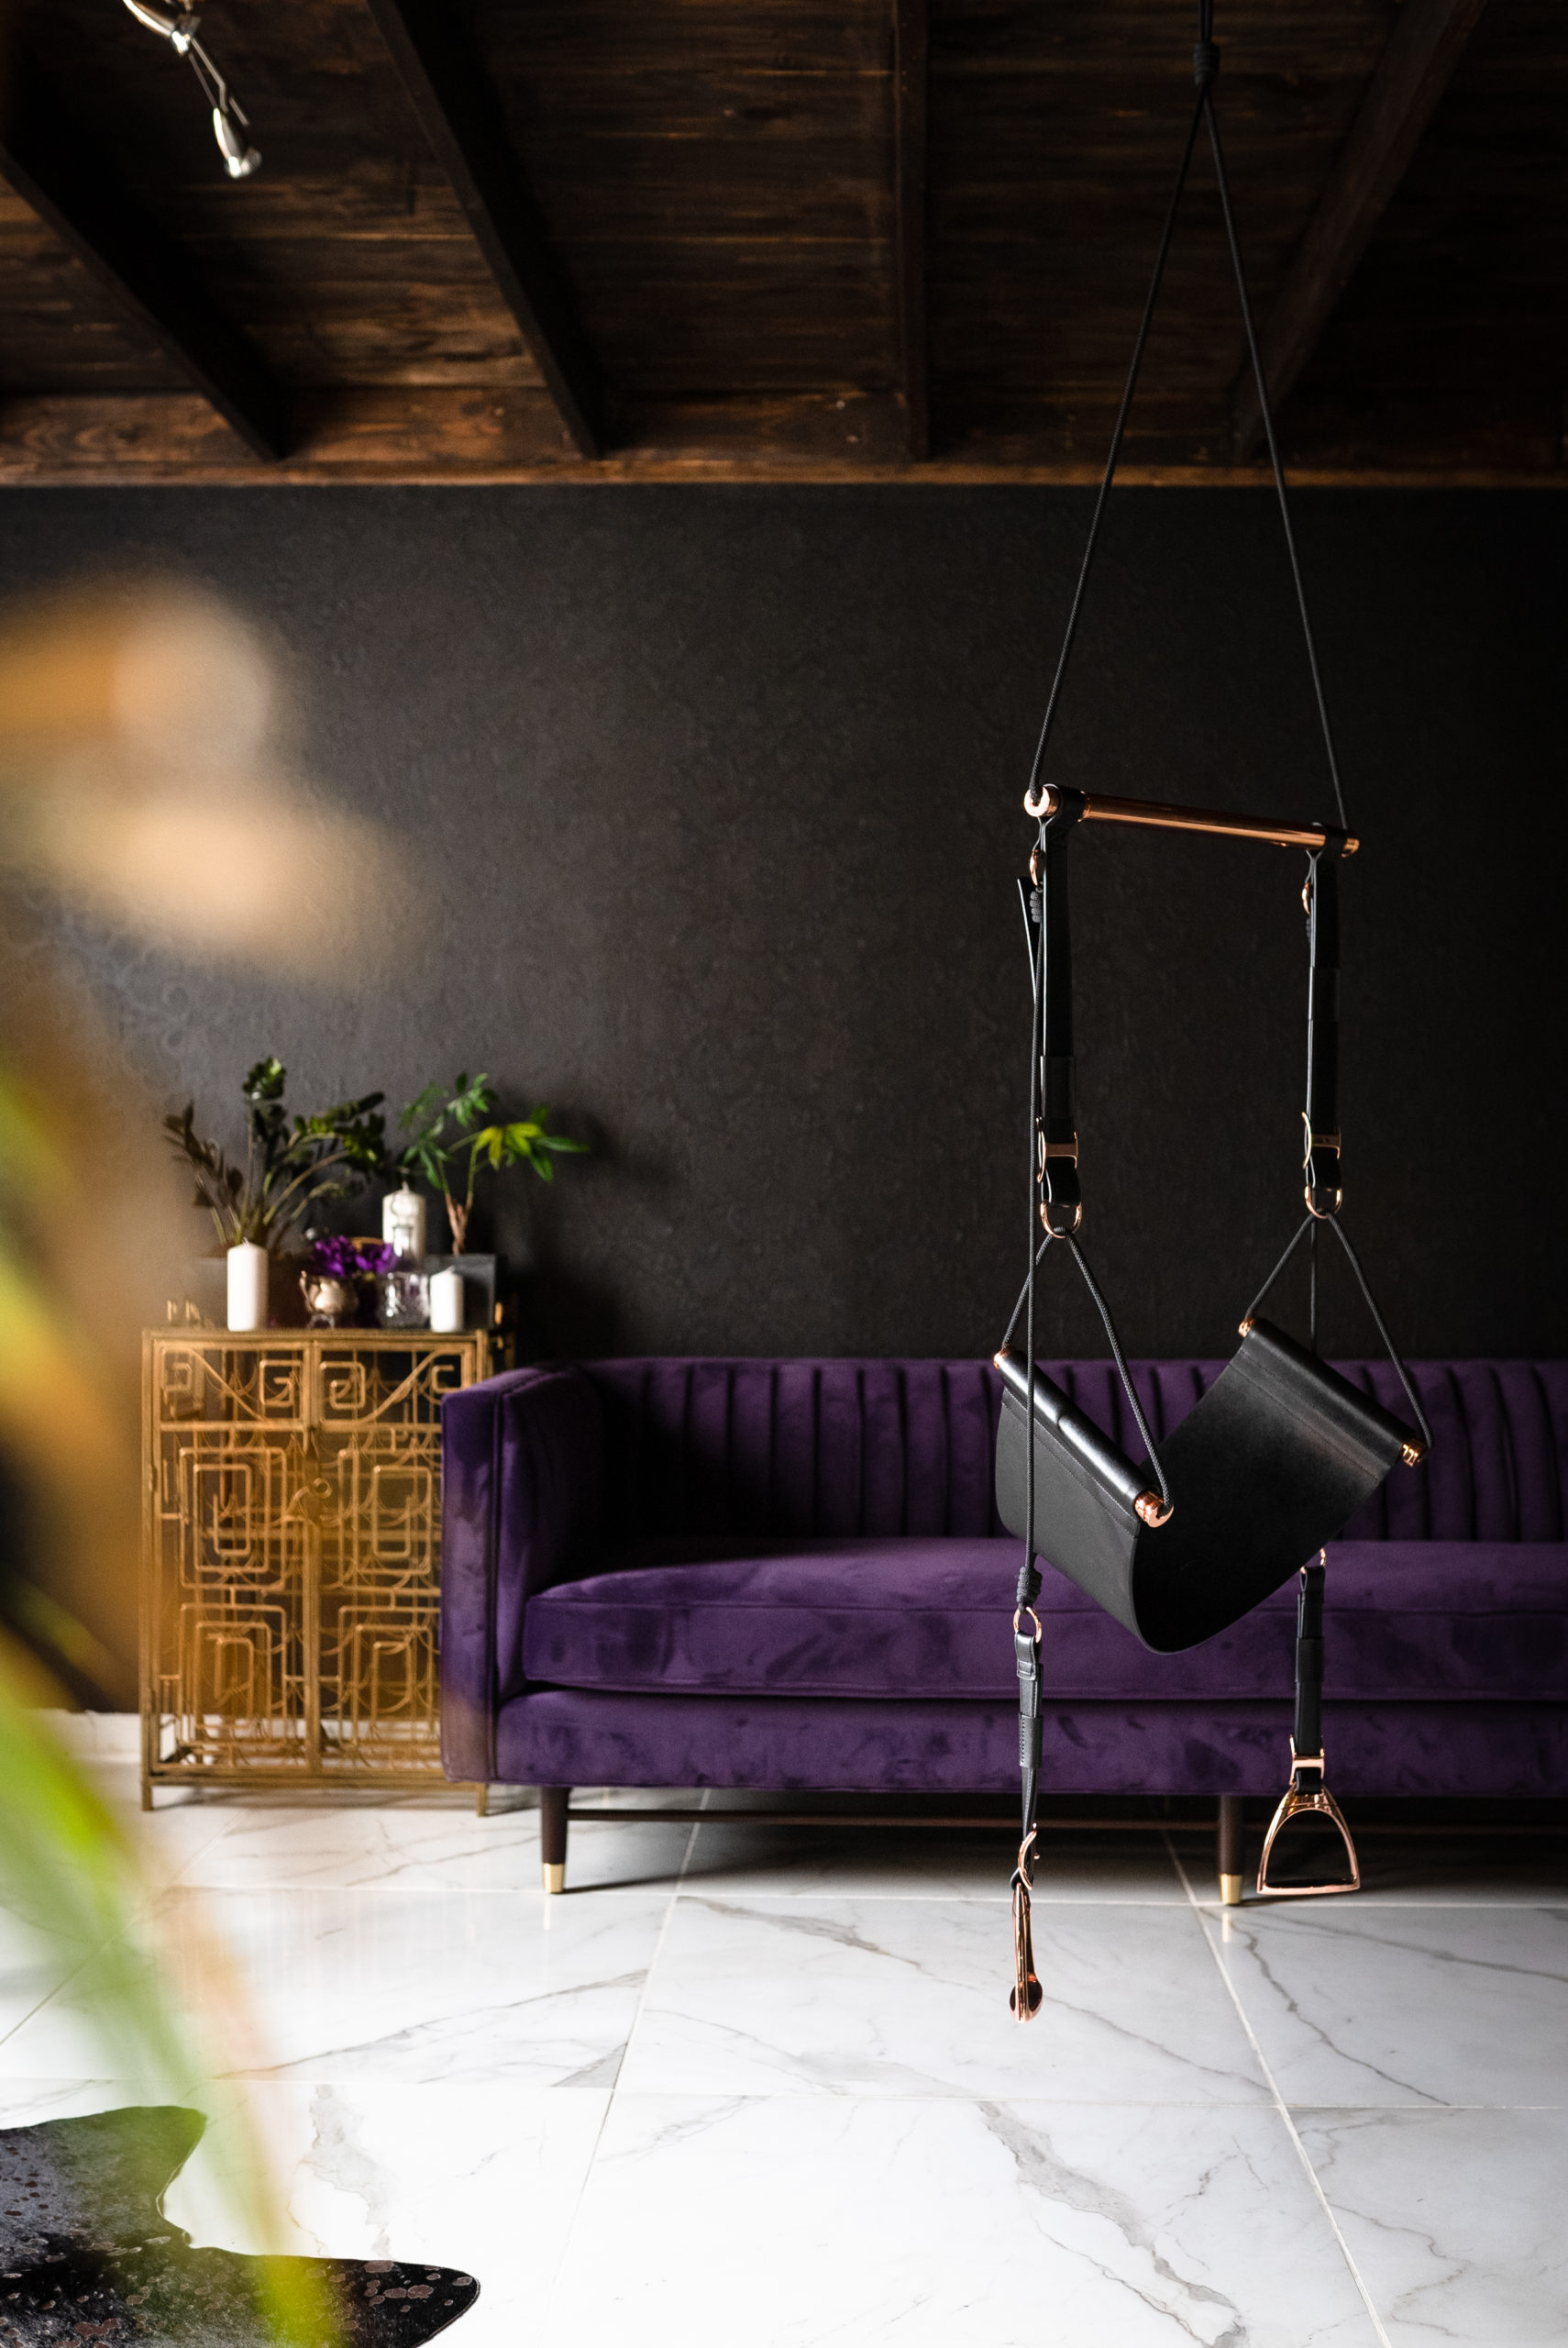 A Black leather sex swing hangs from the ceiling in front of a plush purple couch